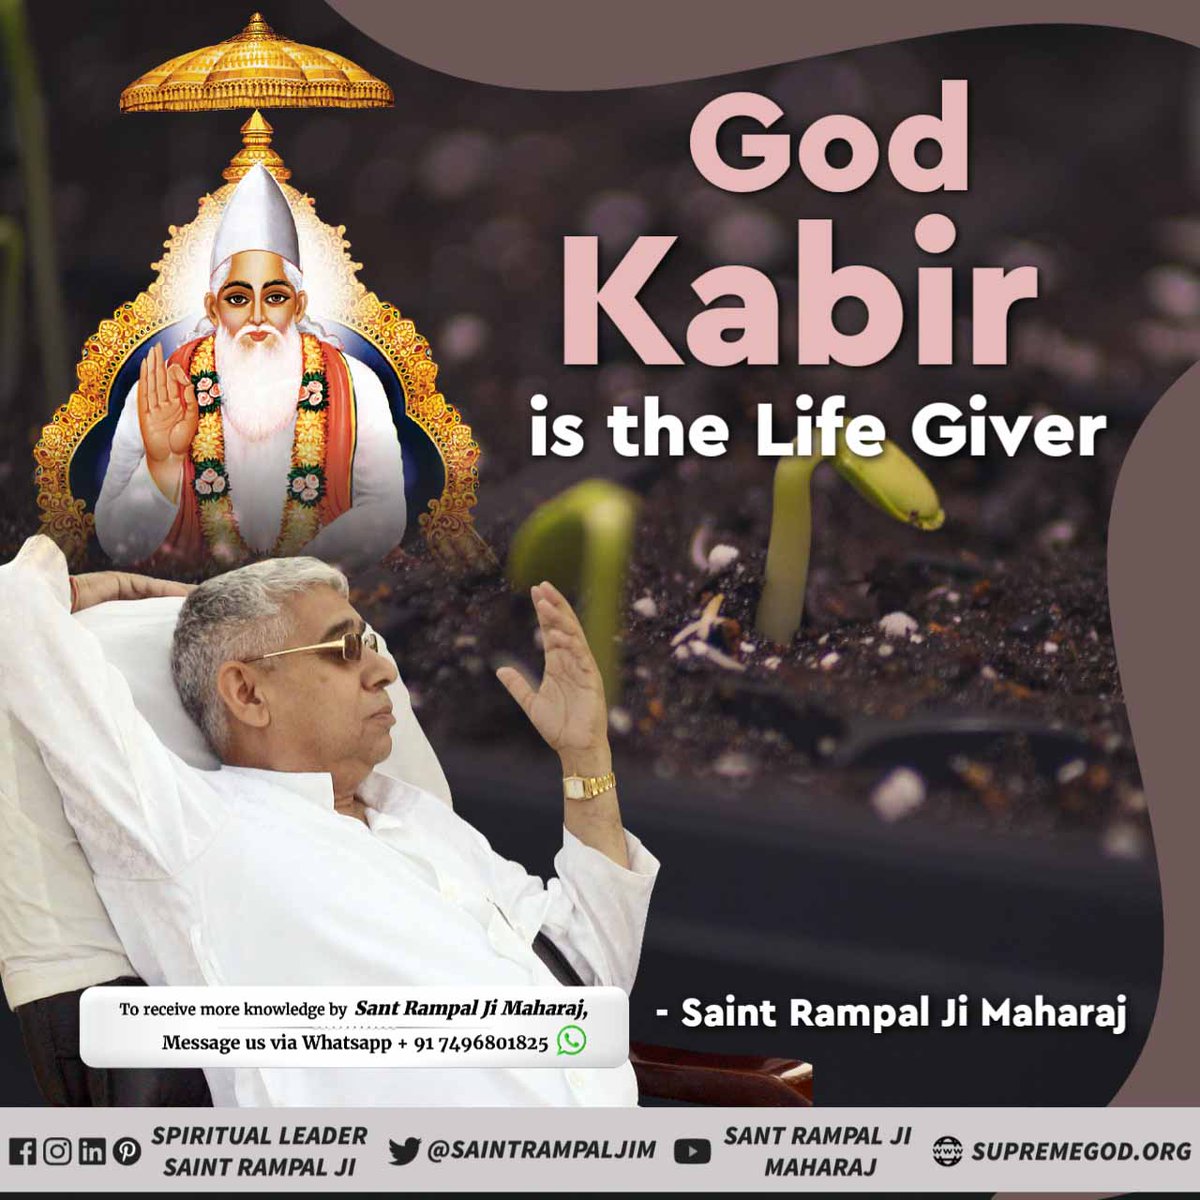 #अविनाशी_परमात्मा_कबीर God Kabir comes in all the 4 yugas In Satyug, Lord Kabir is known by the name of Sat Sukrit; in Treta, God is known by the name of Muninder; Karunamay is God's name in Dwapar & in Kalyug, God manifests & is known by His real name, that is Kavirdev.